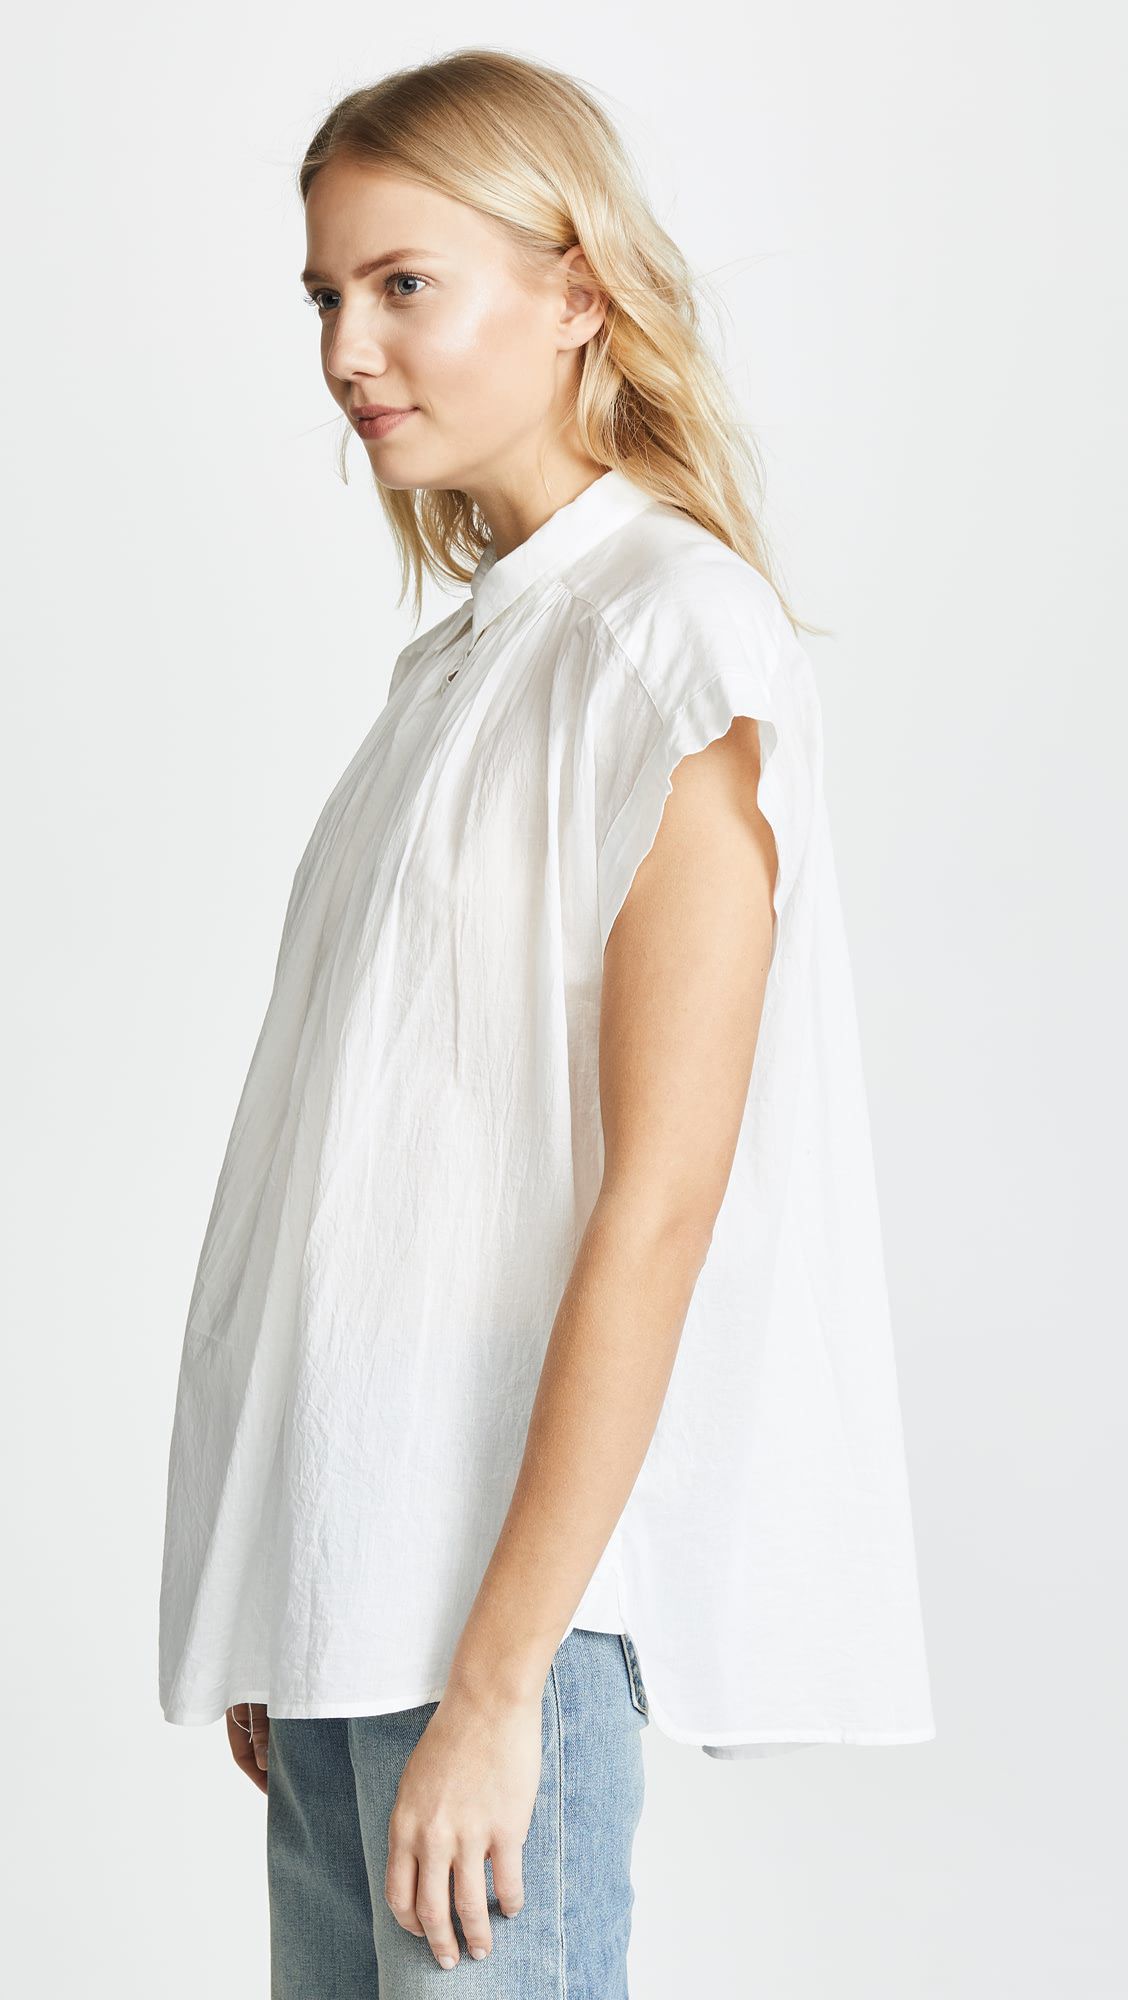 ODM Lapel silhouette pleated white simple shirt